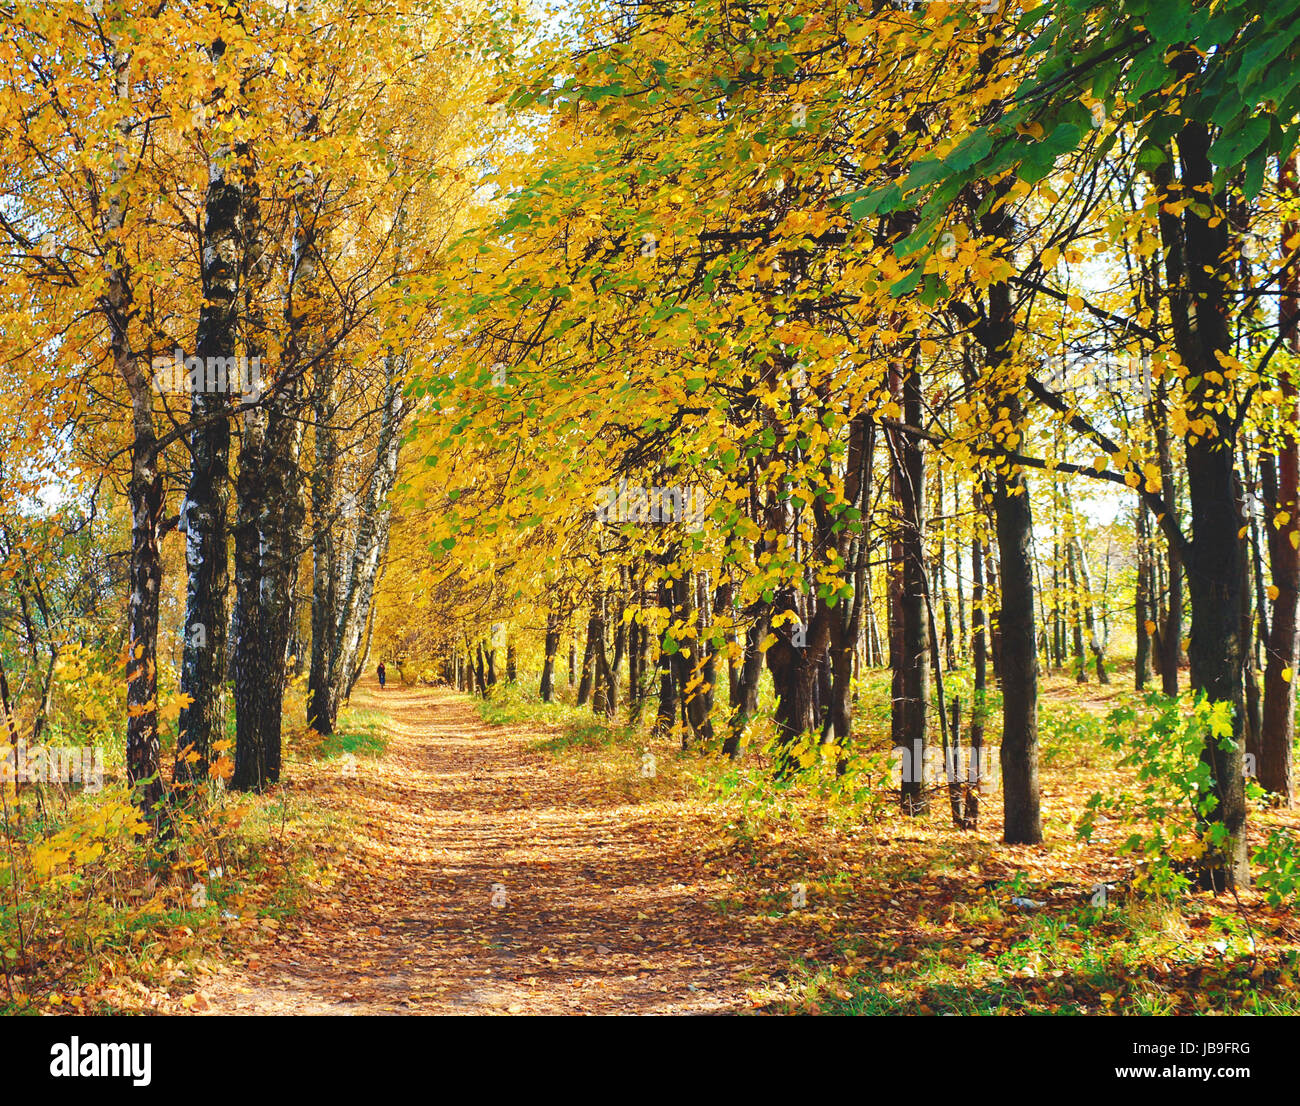 Trees covered with yellow leaves along the roads, Laden with yellow leaves. Stock Photo